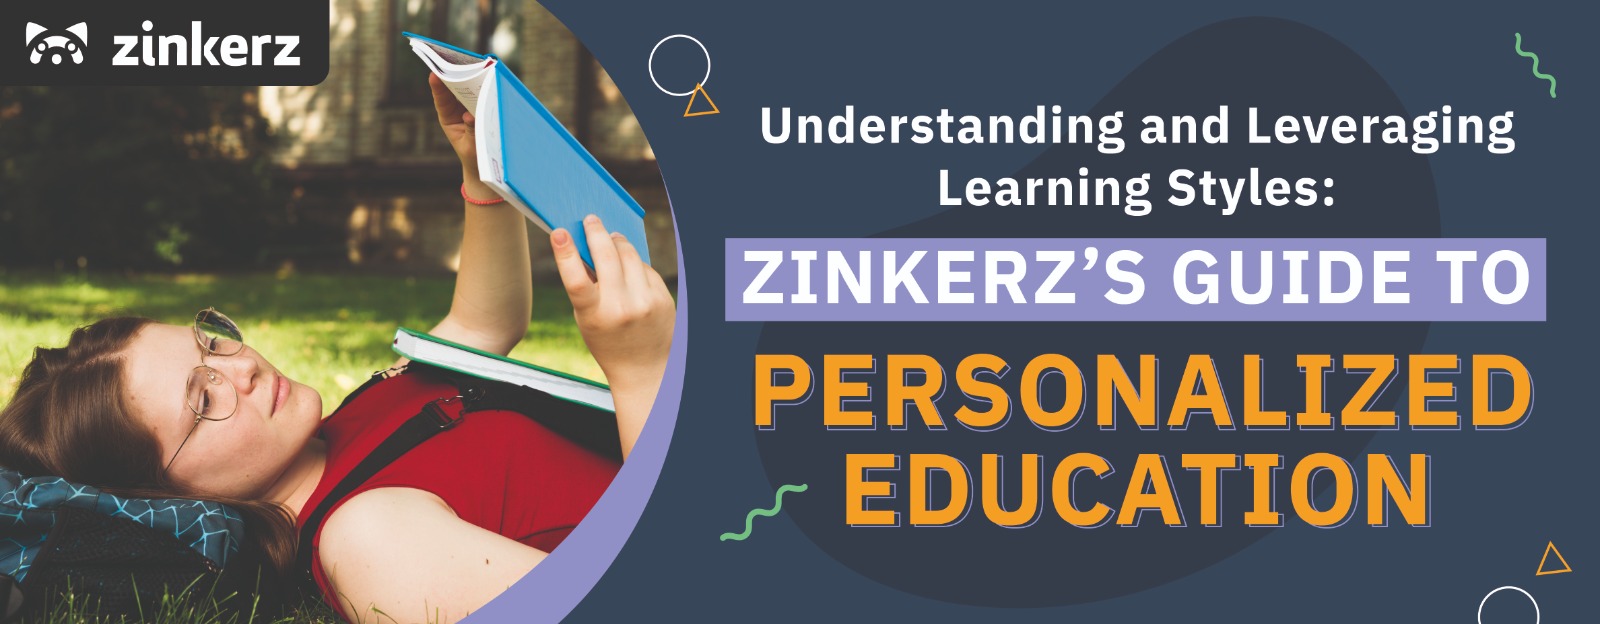 Understanding and Leveraging Learning Styles: Zinkerz’s Guide to Personalized Education